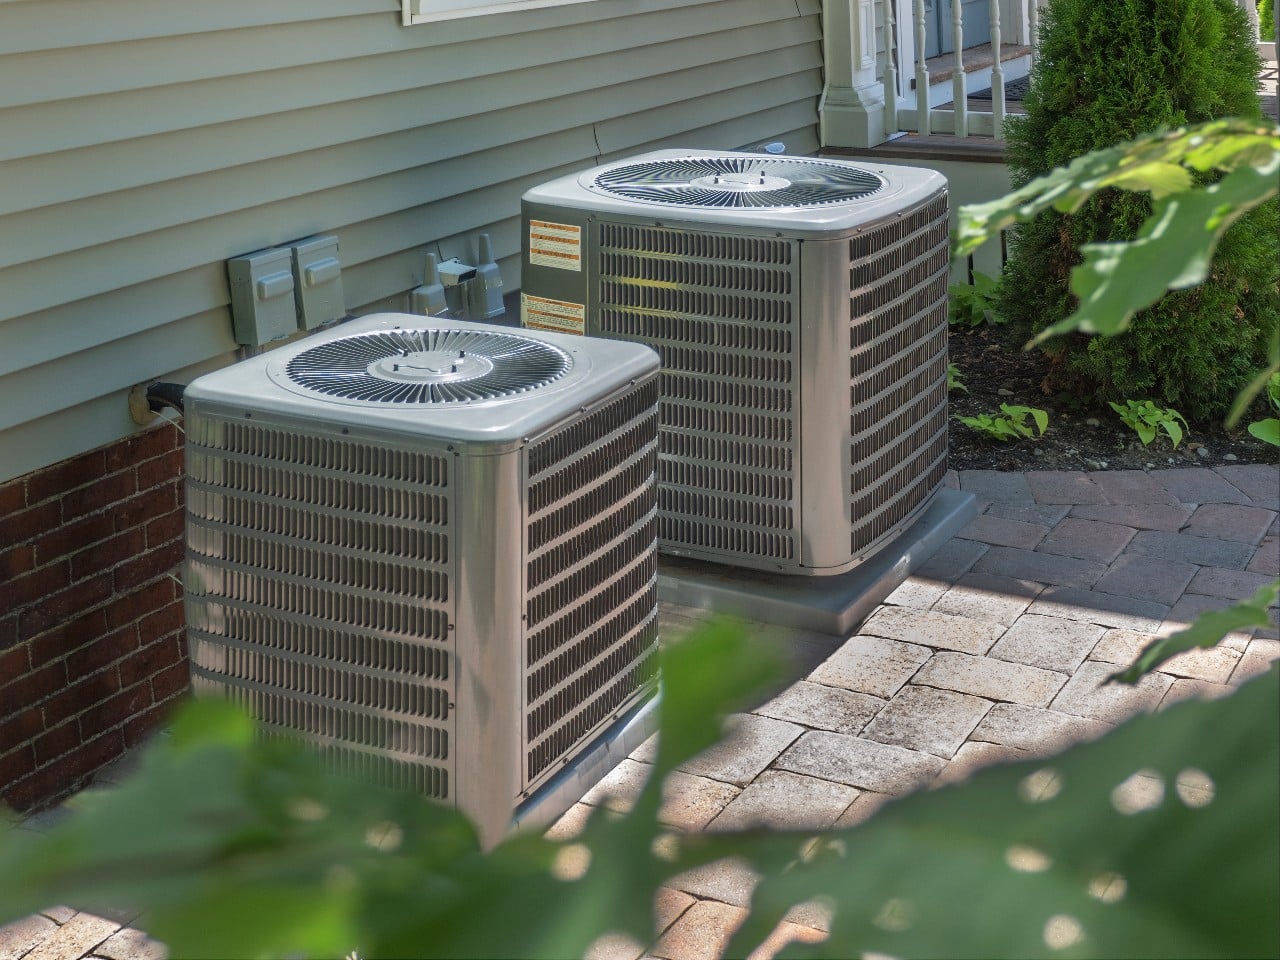 What Is The Average Lifespan Of A Furnace And Air Conditioner